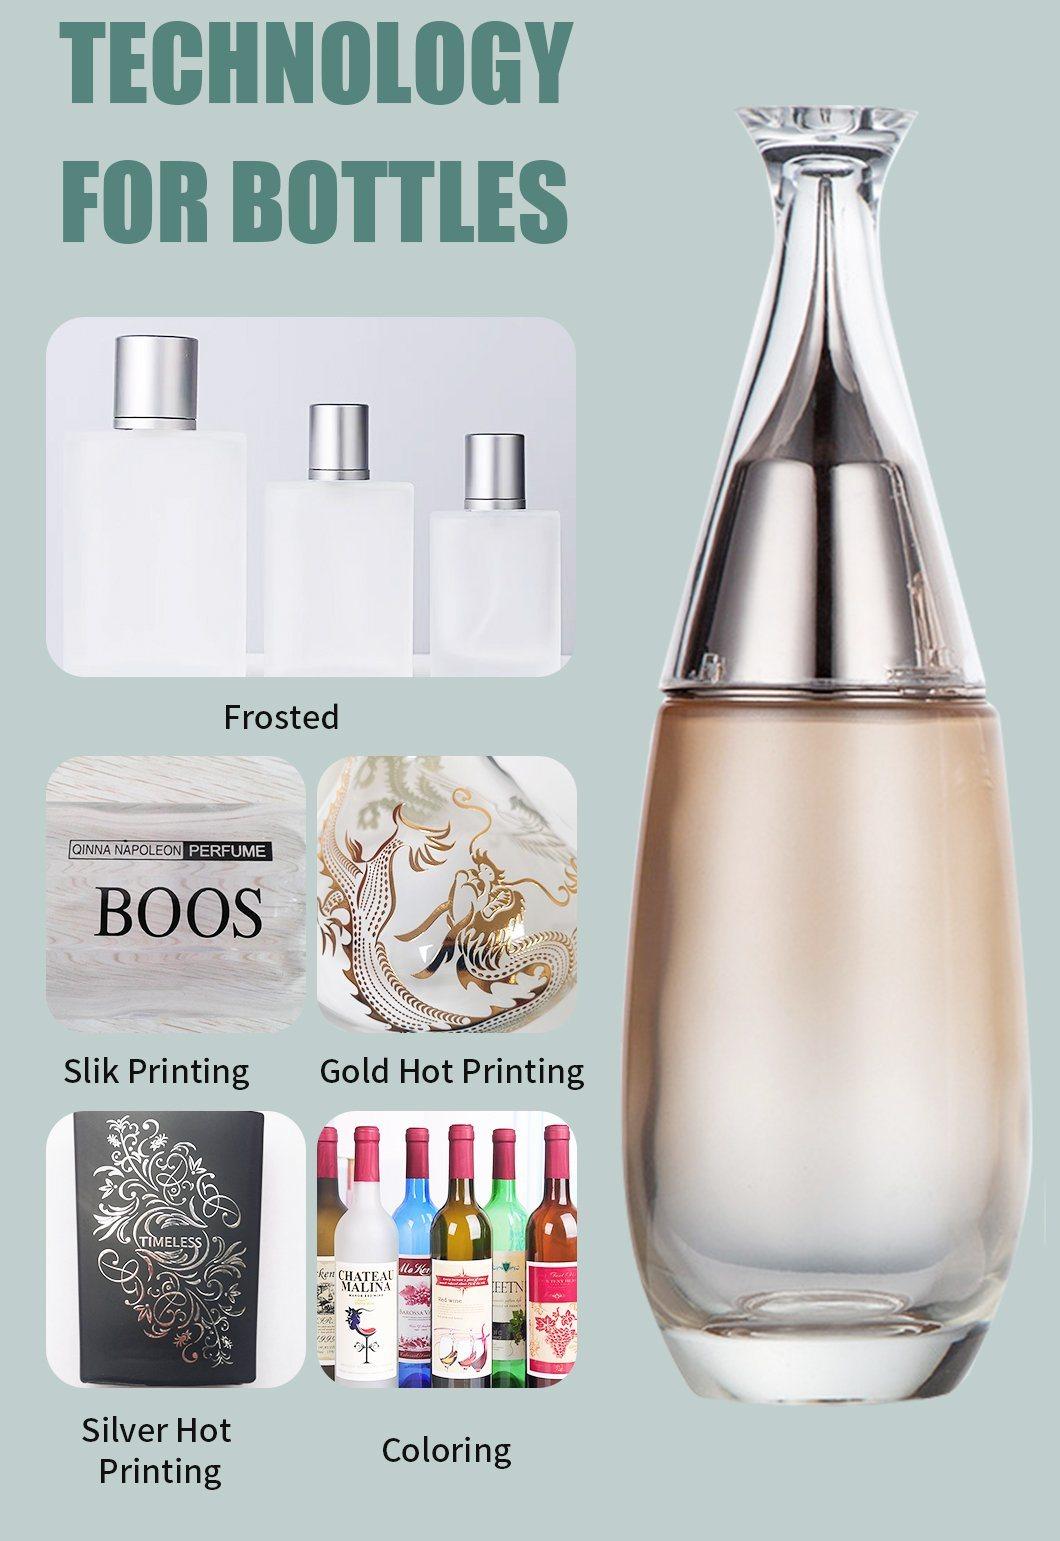 Electroplated Customized Glossy Perfume Glass Bottles in Gold and Black Pumps